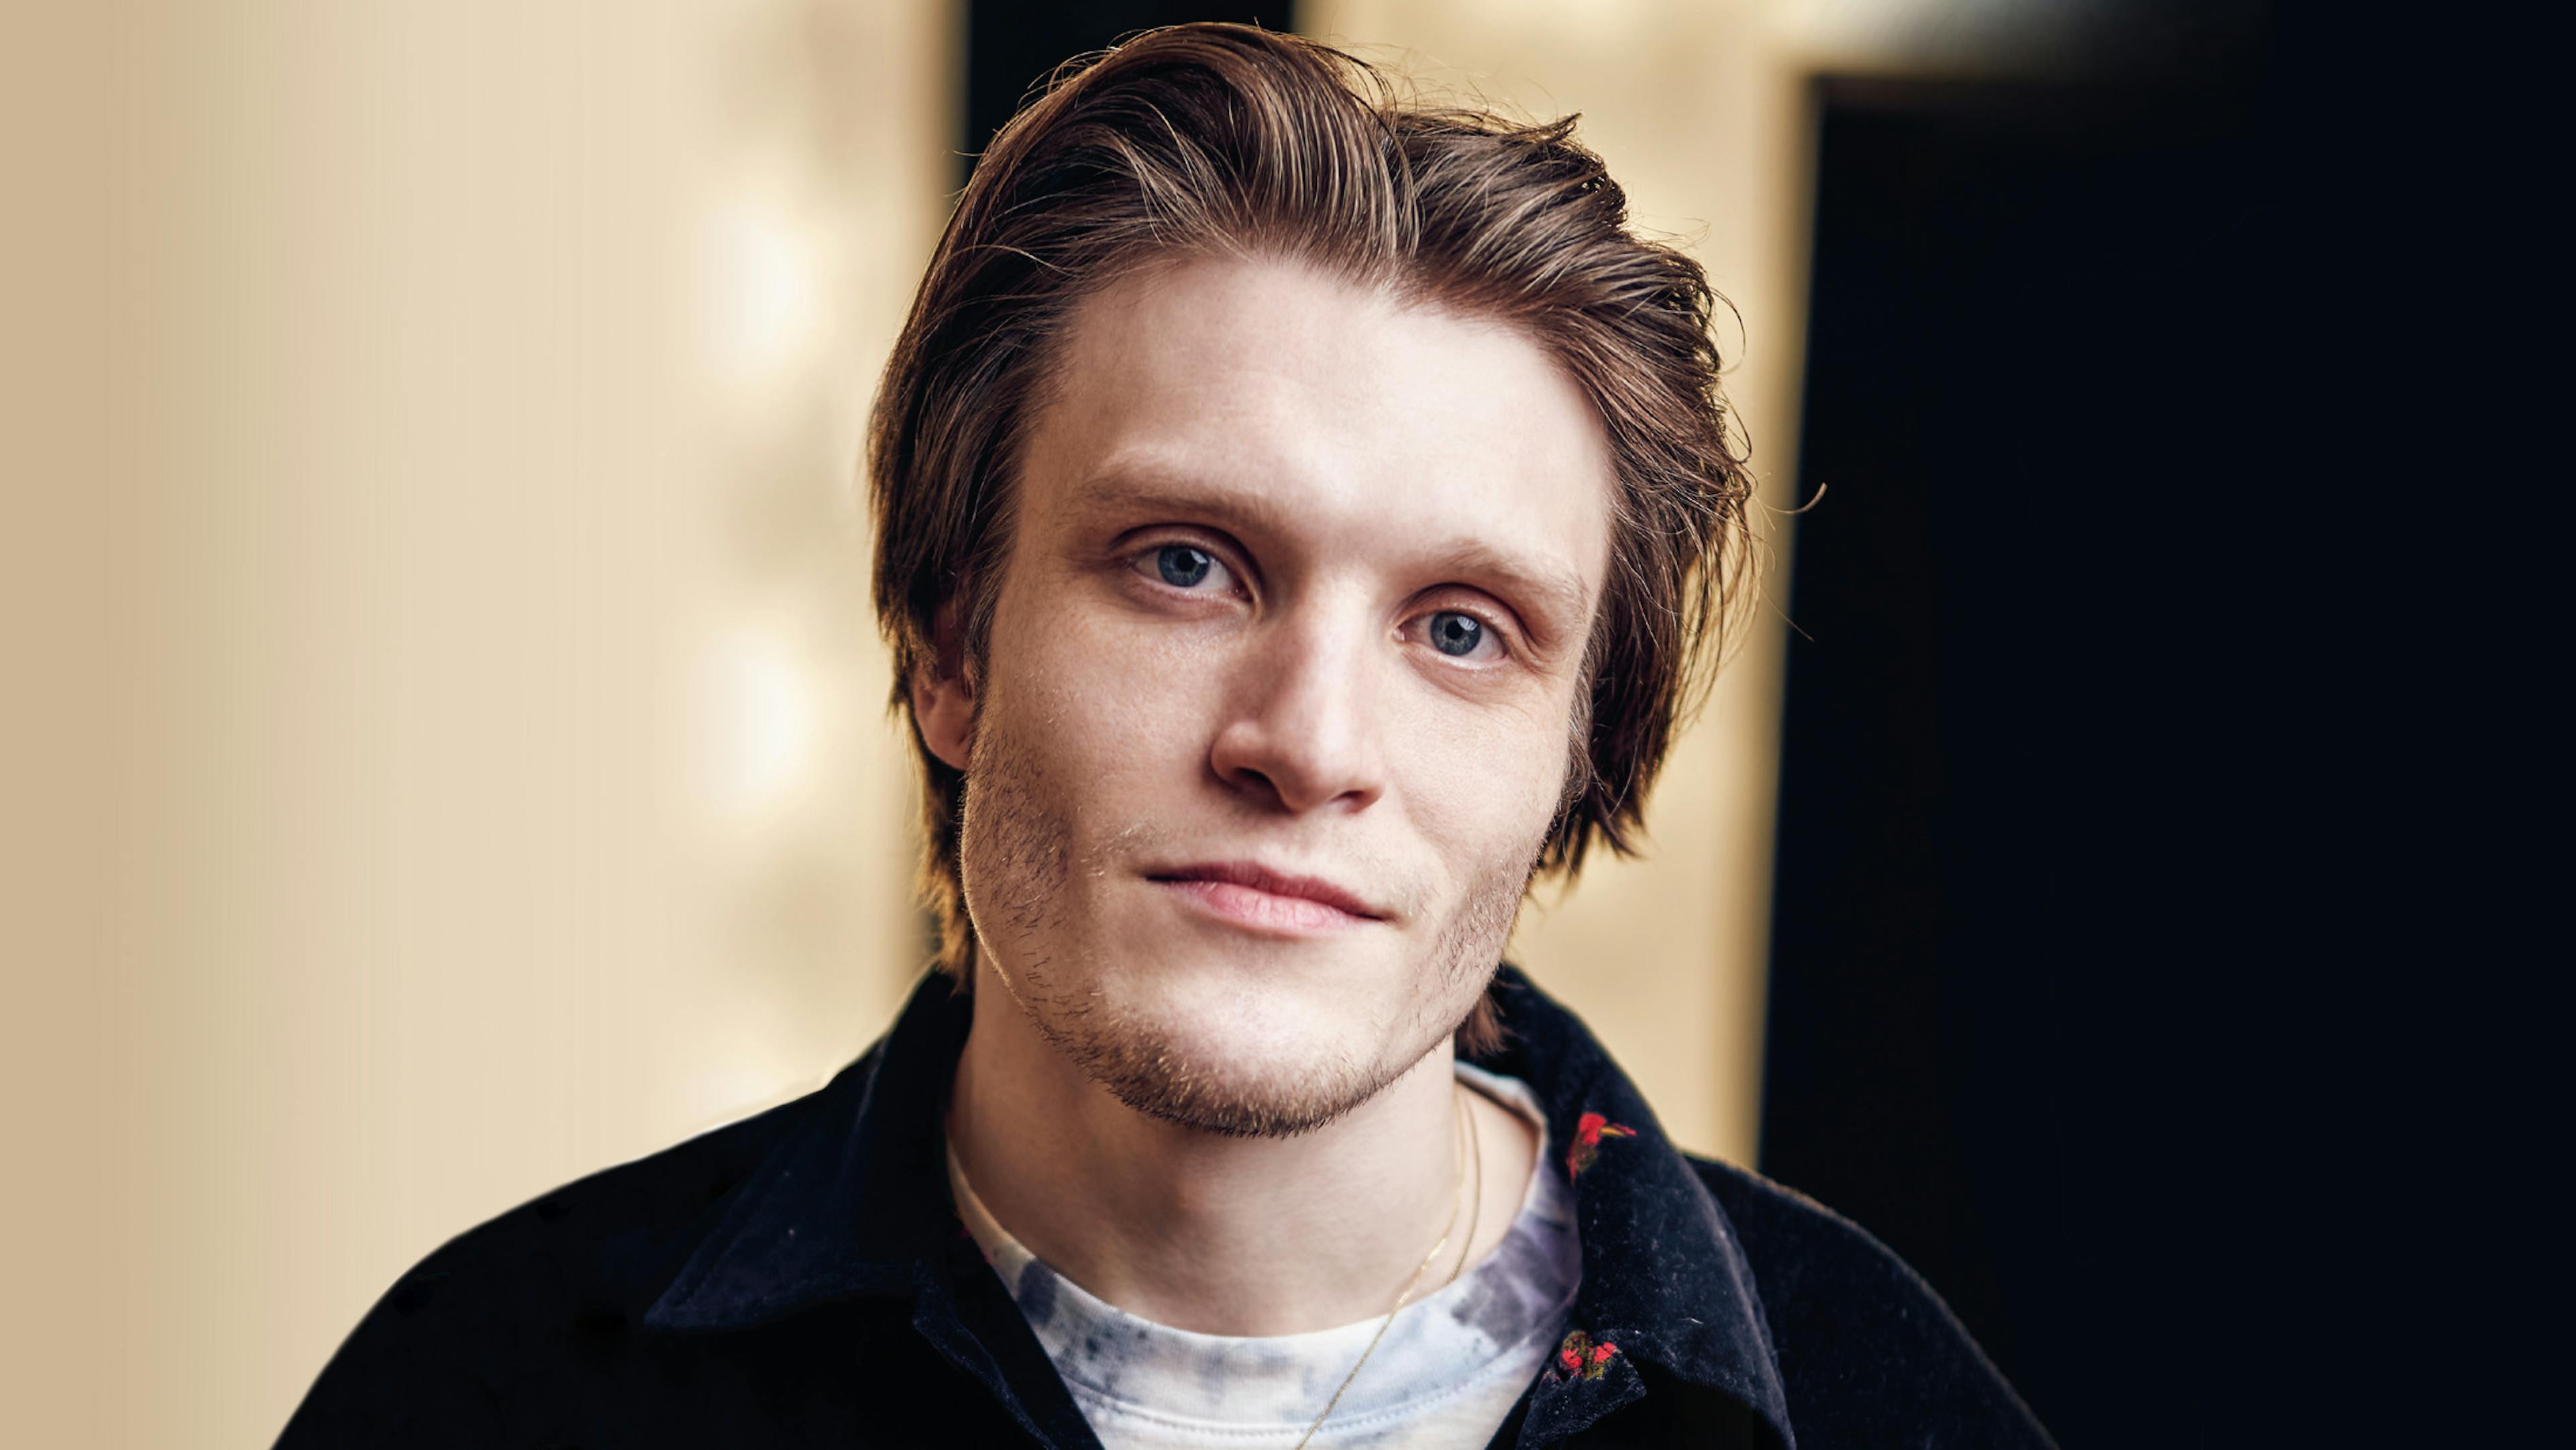 Neck Deep's Ben Barlow: "We’ve all had to practice some resilience and do some soul searching"